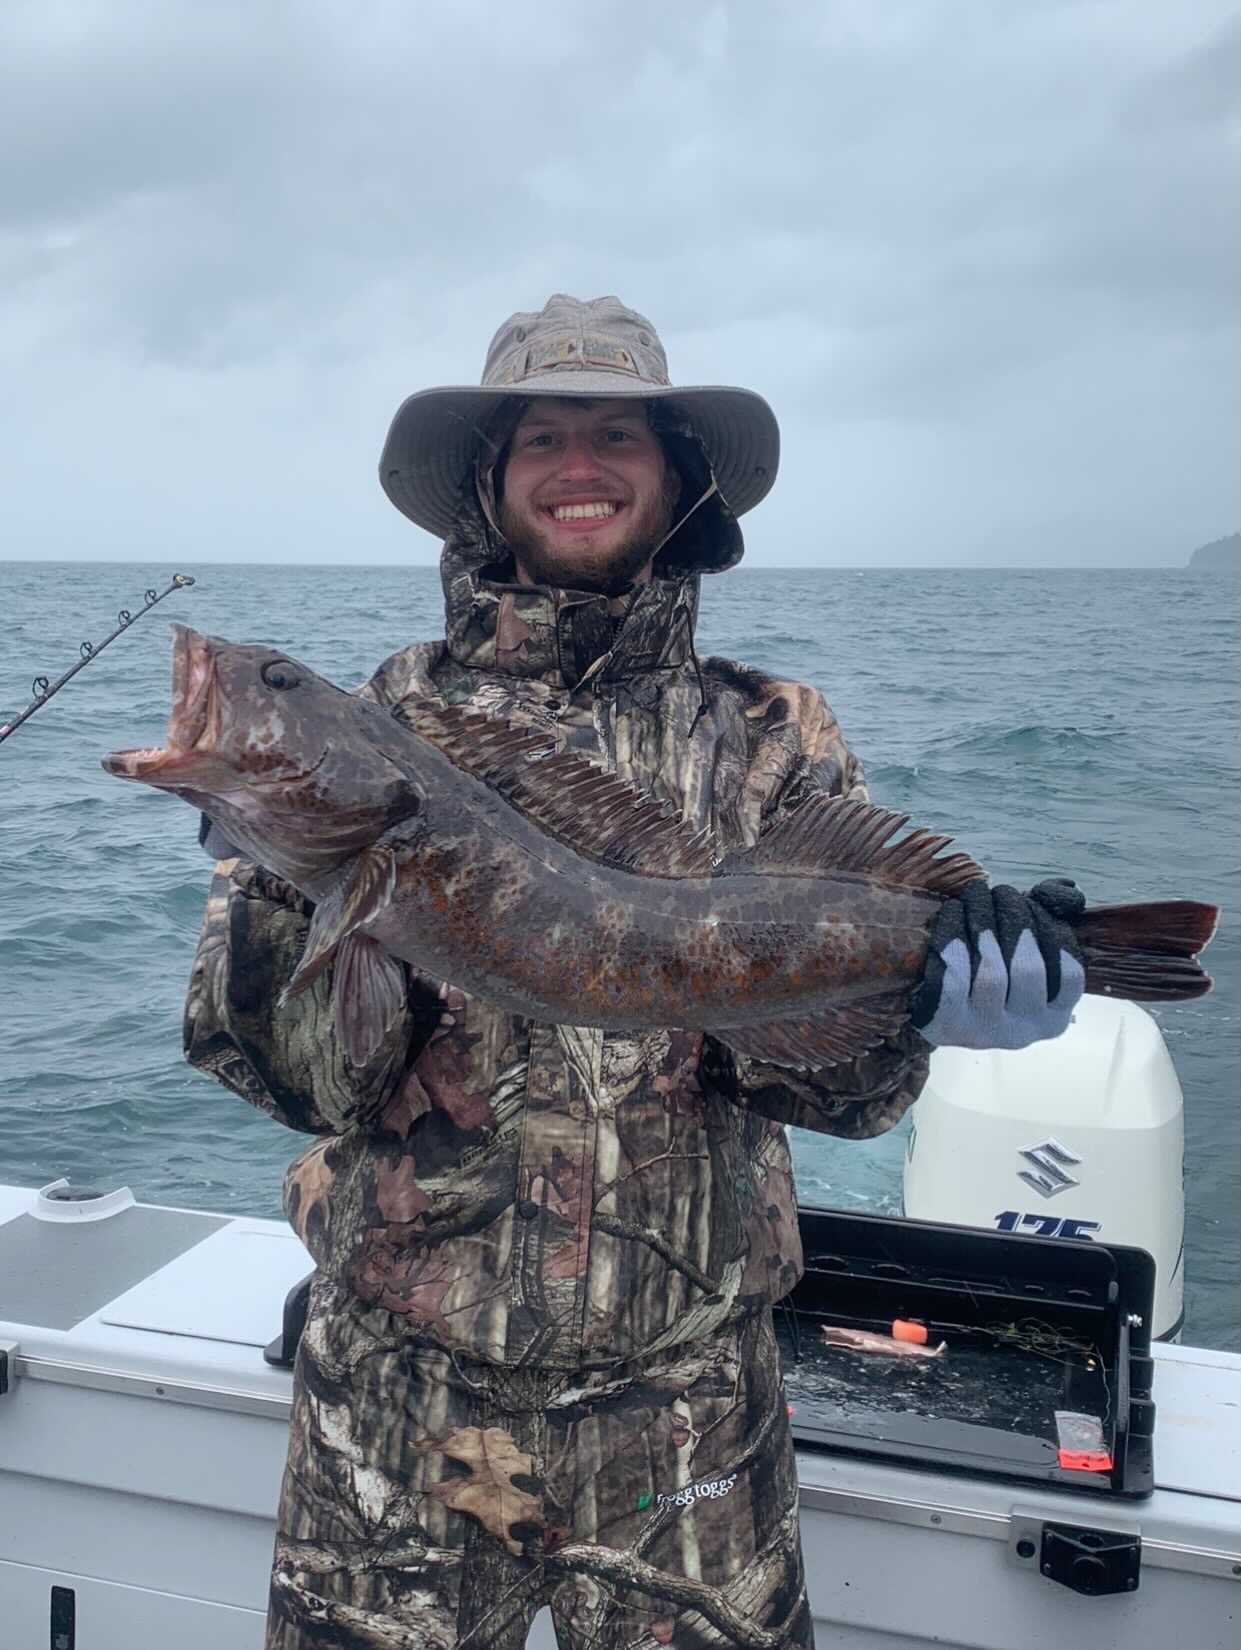 Cole with a lingcod, caught on a fishing trip to Alaska with his dad.